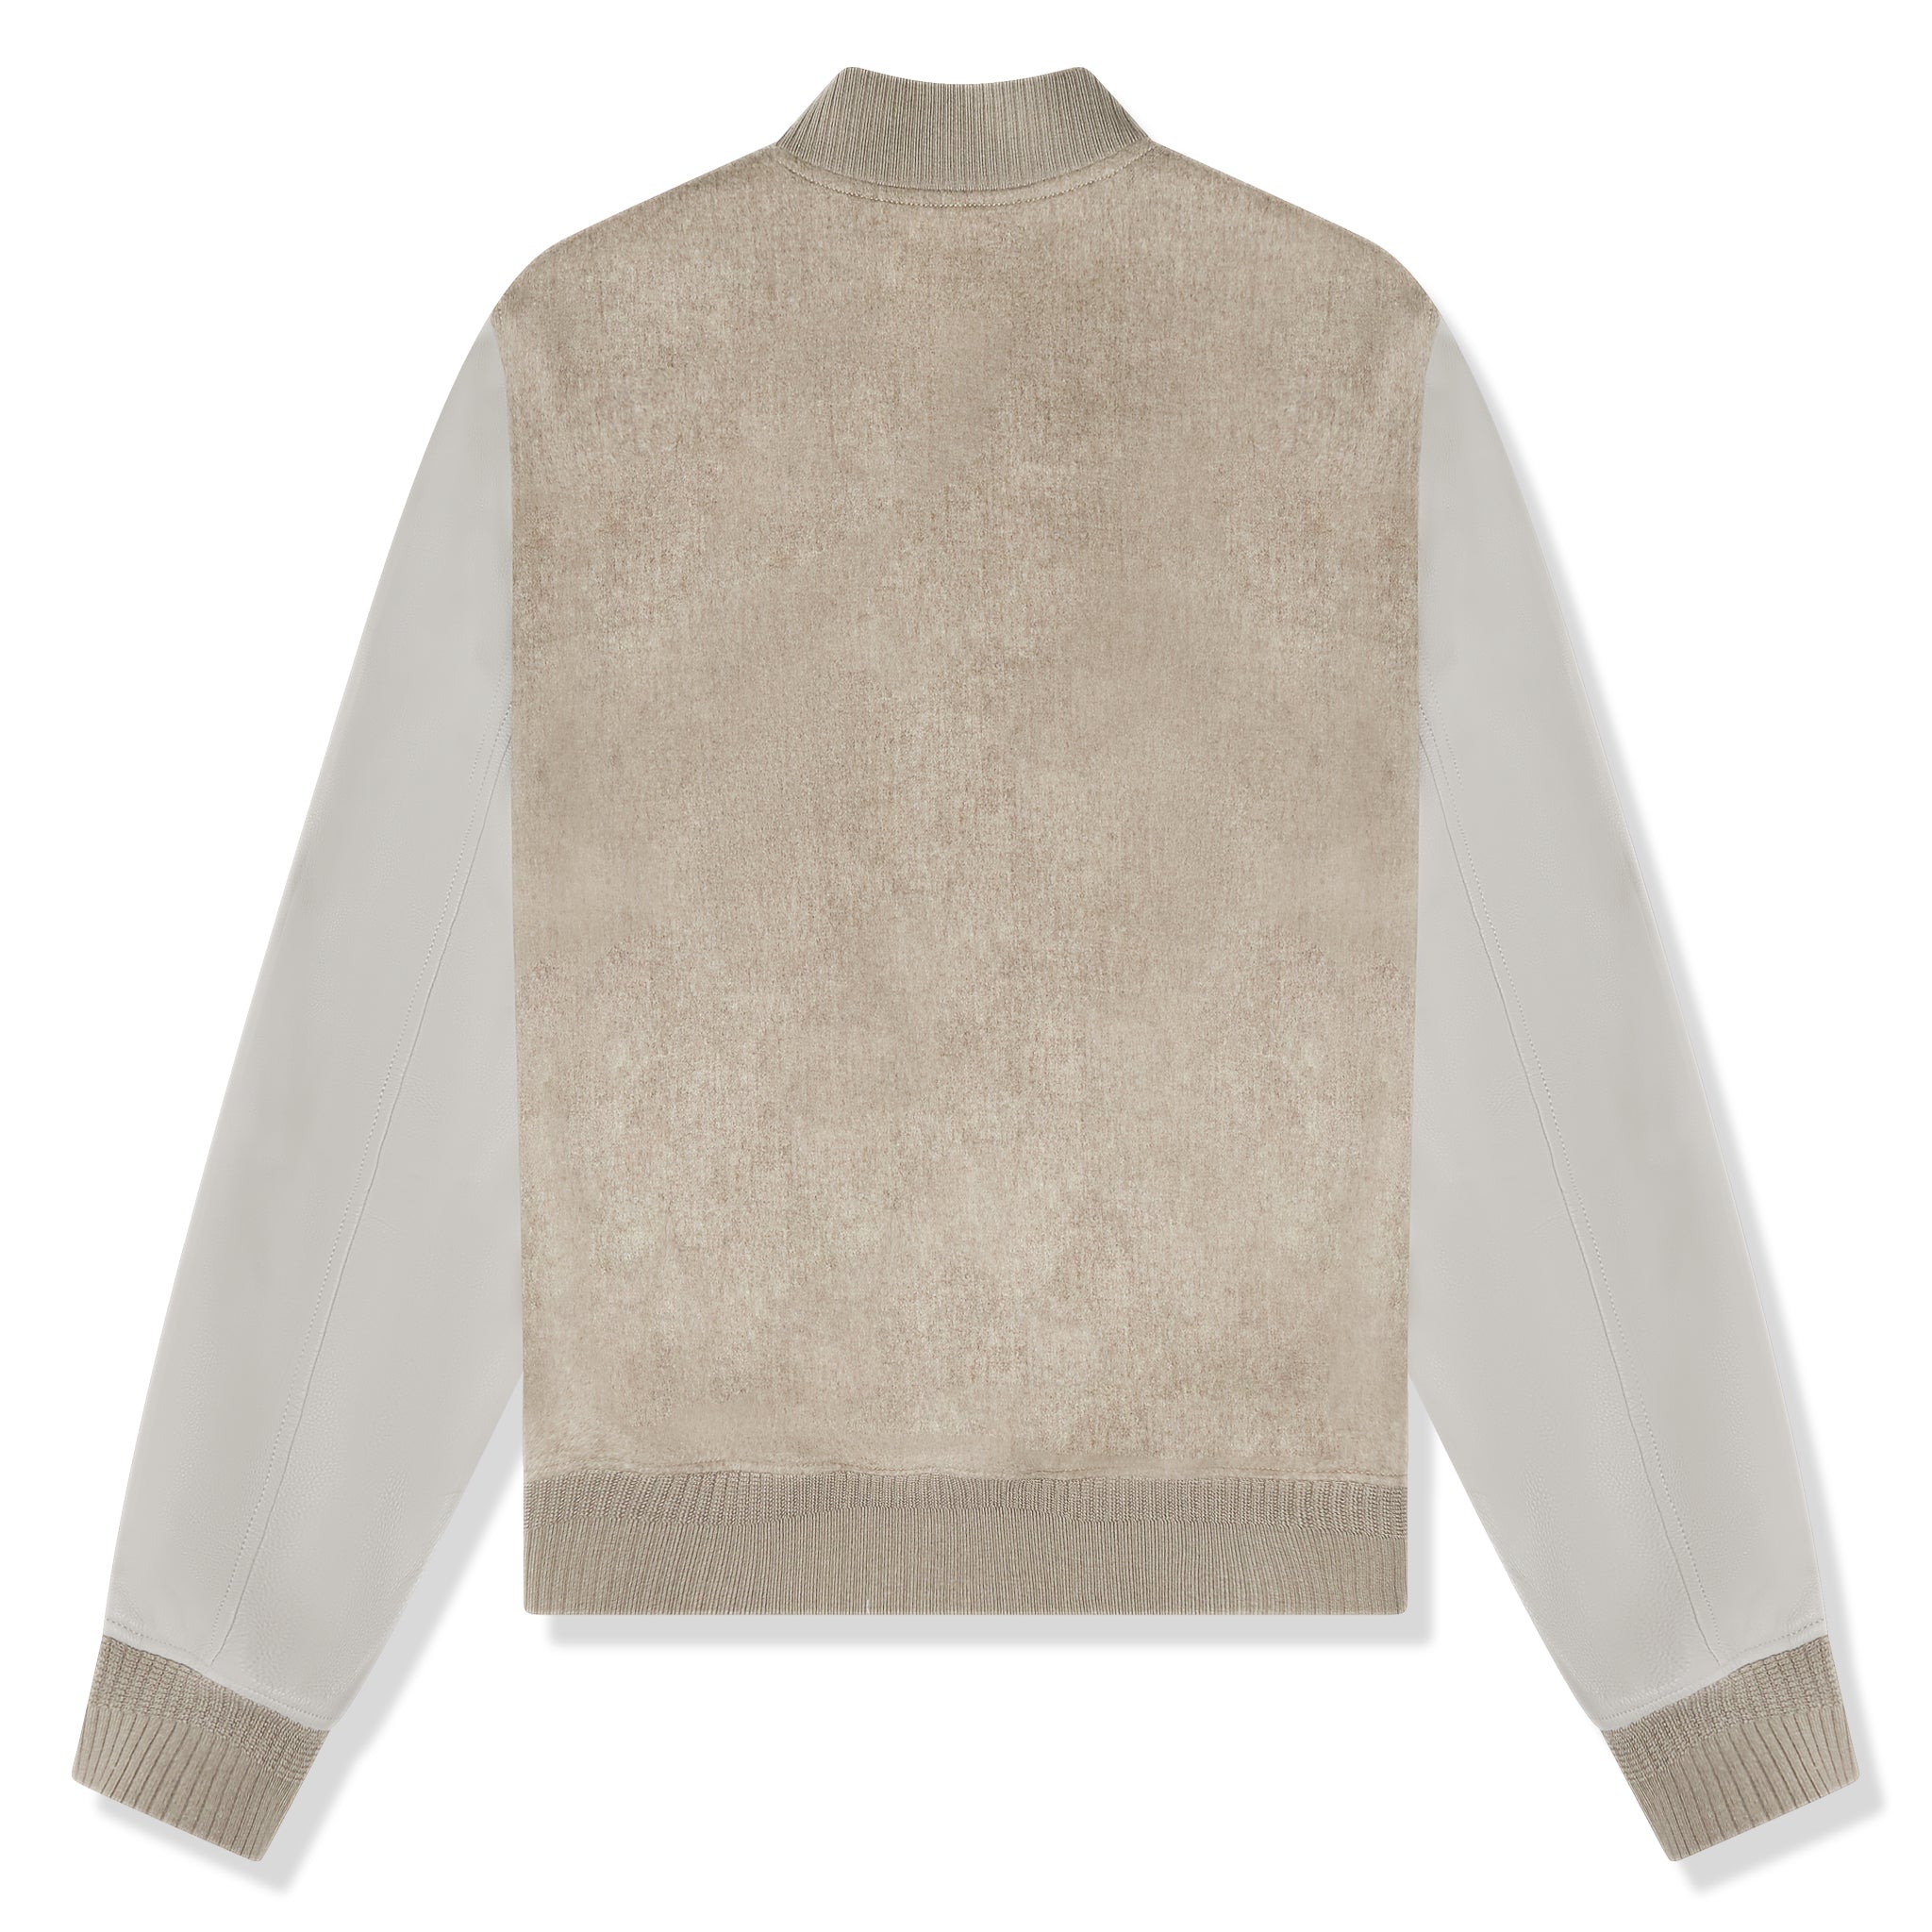 Back view of Louis Vuitton Wool Leather Beige Bomber Jacket